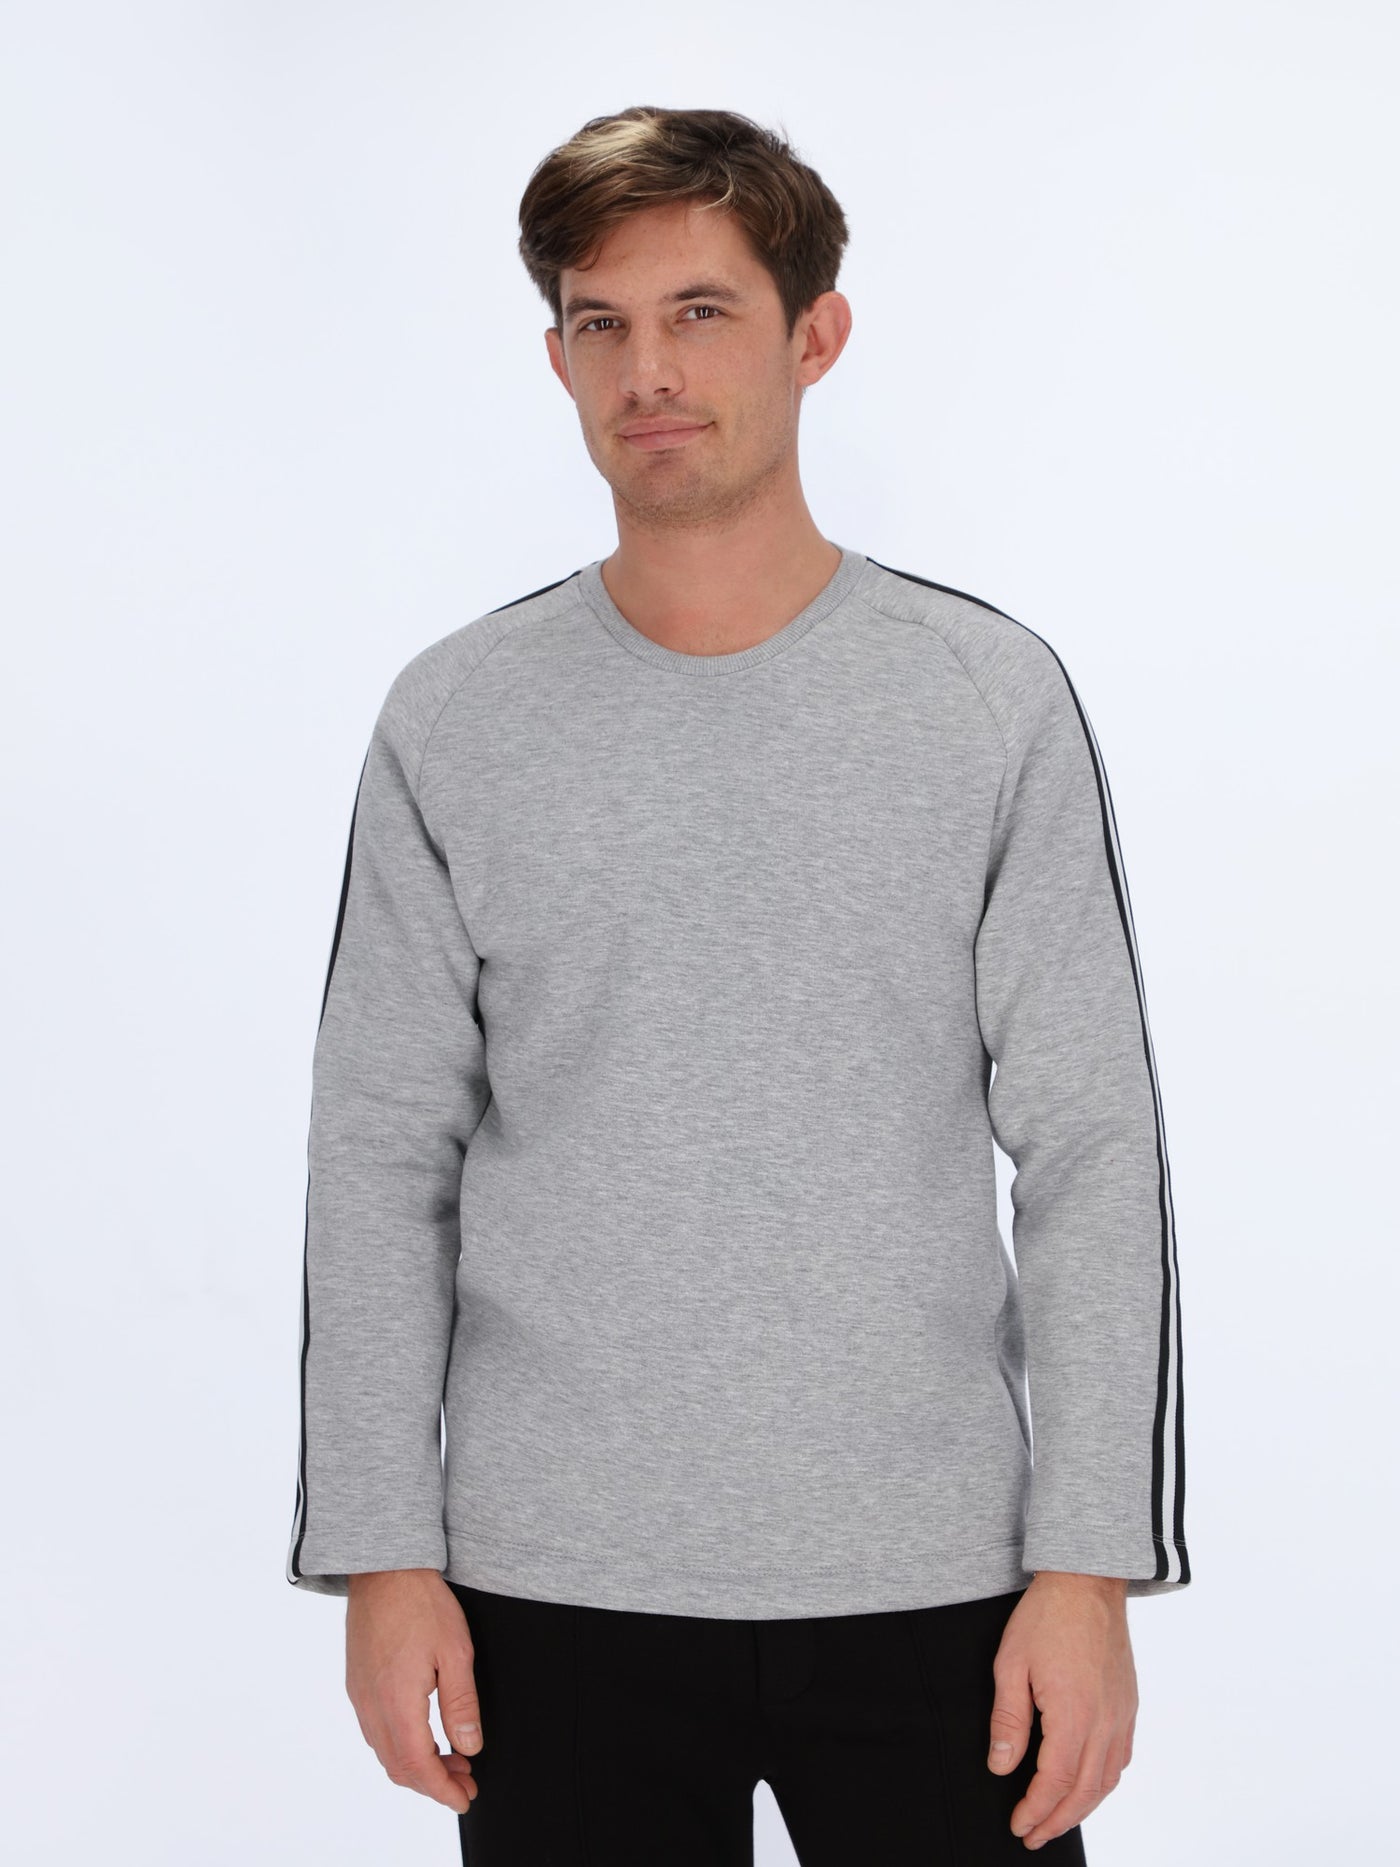 Heather Sweatshirt with Tapes on Sleeve